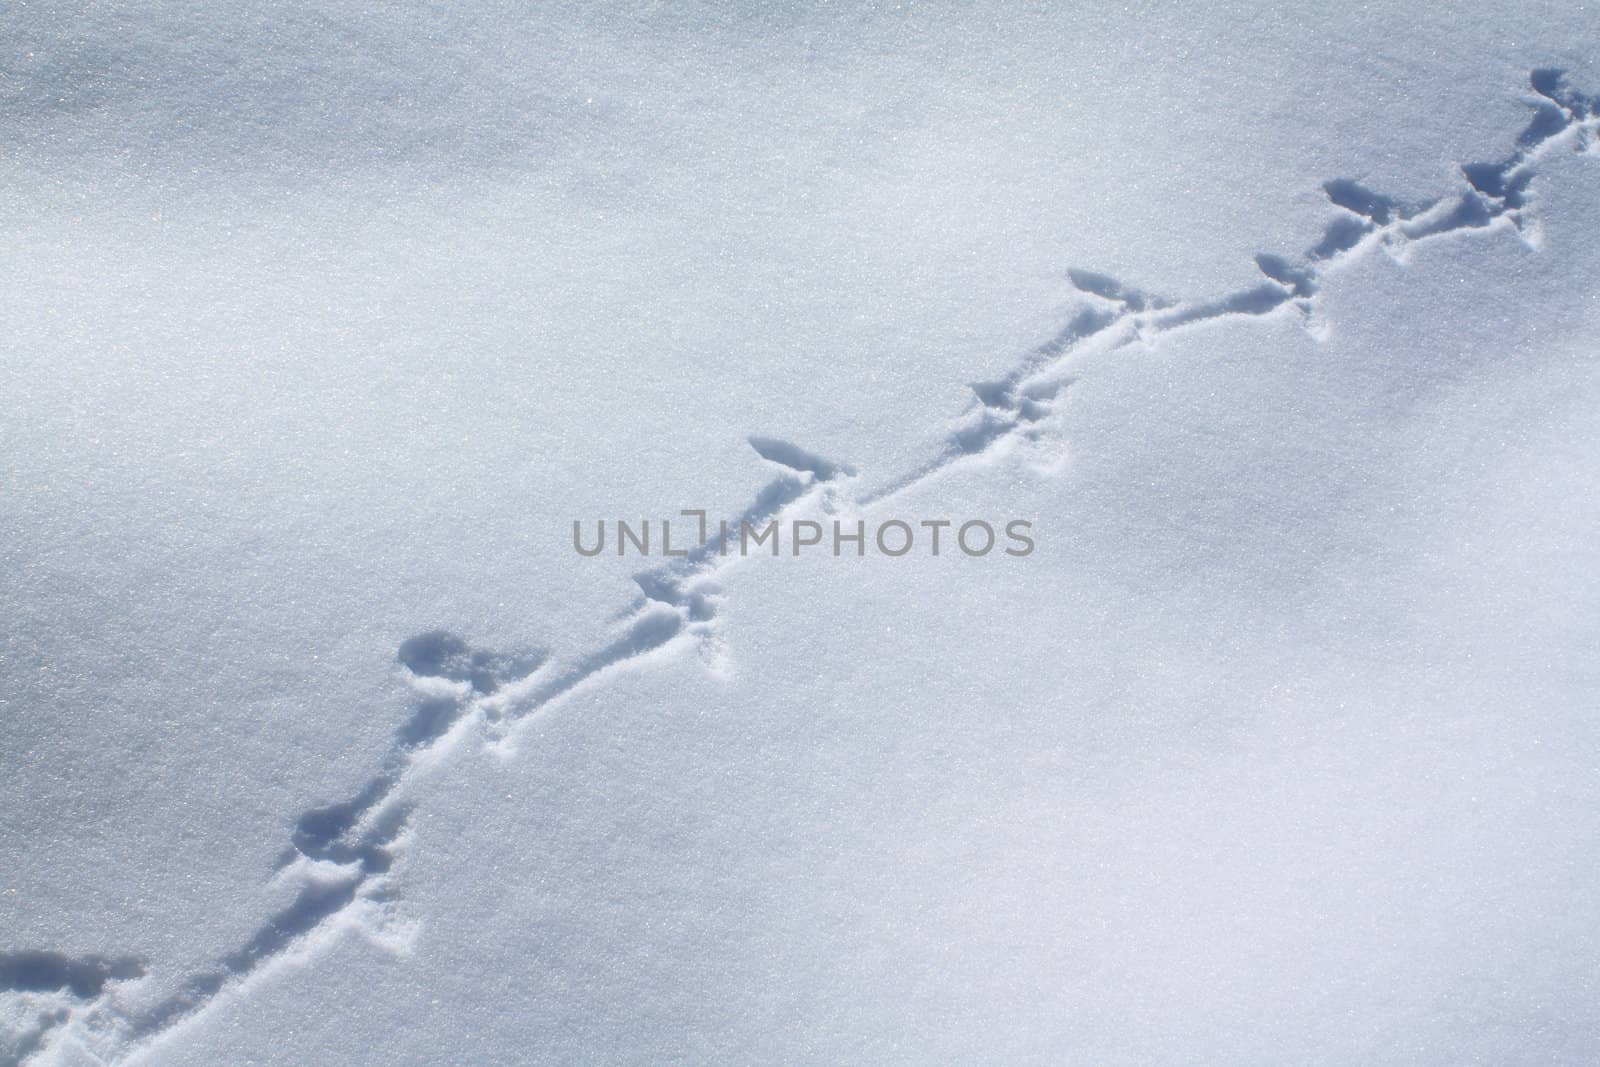 capercaillie trace on white snow by basel101658